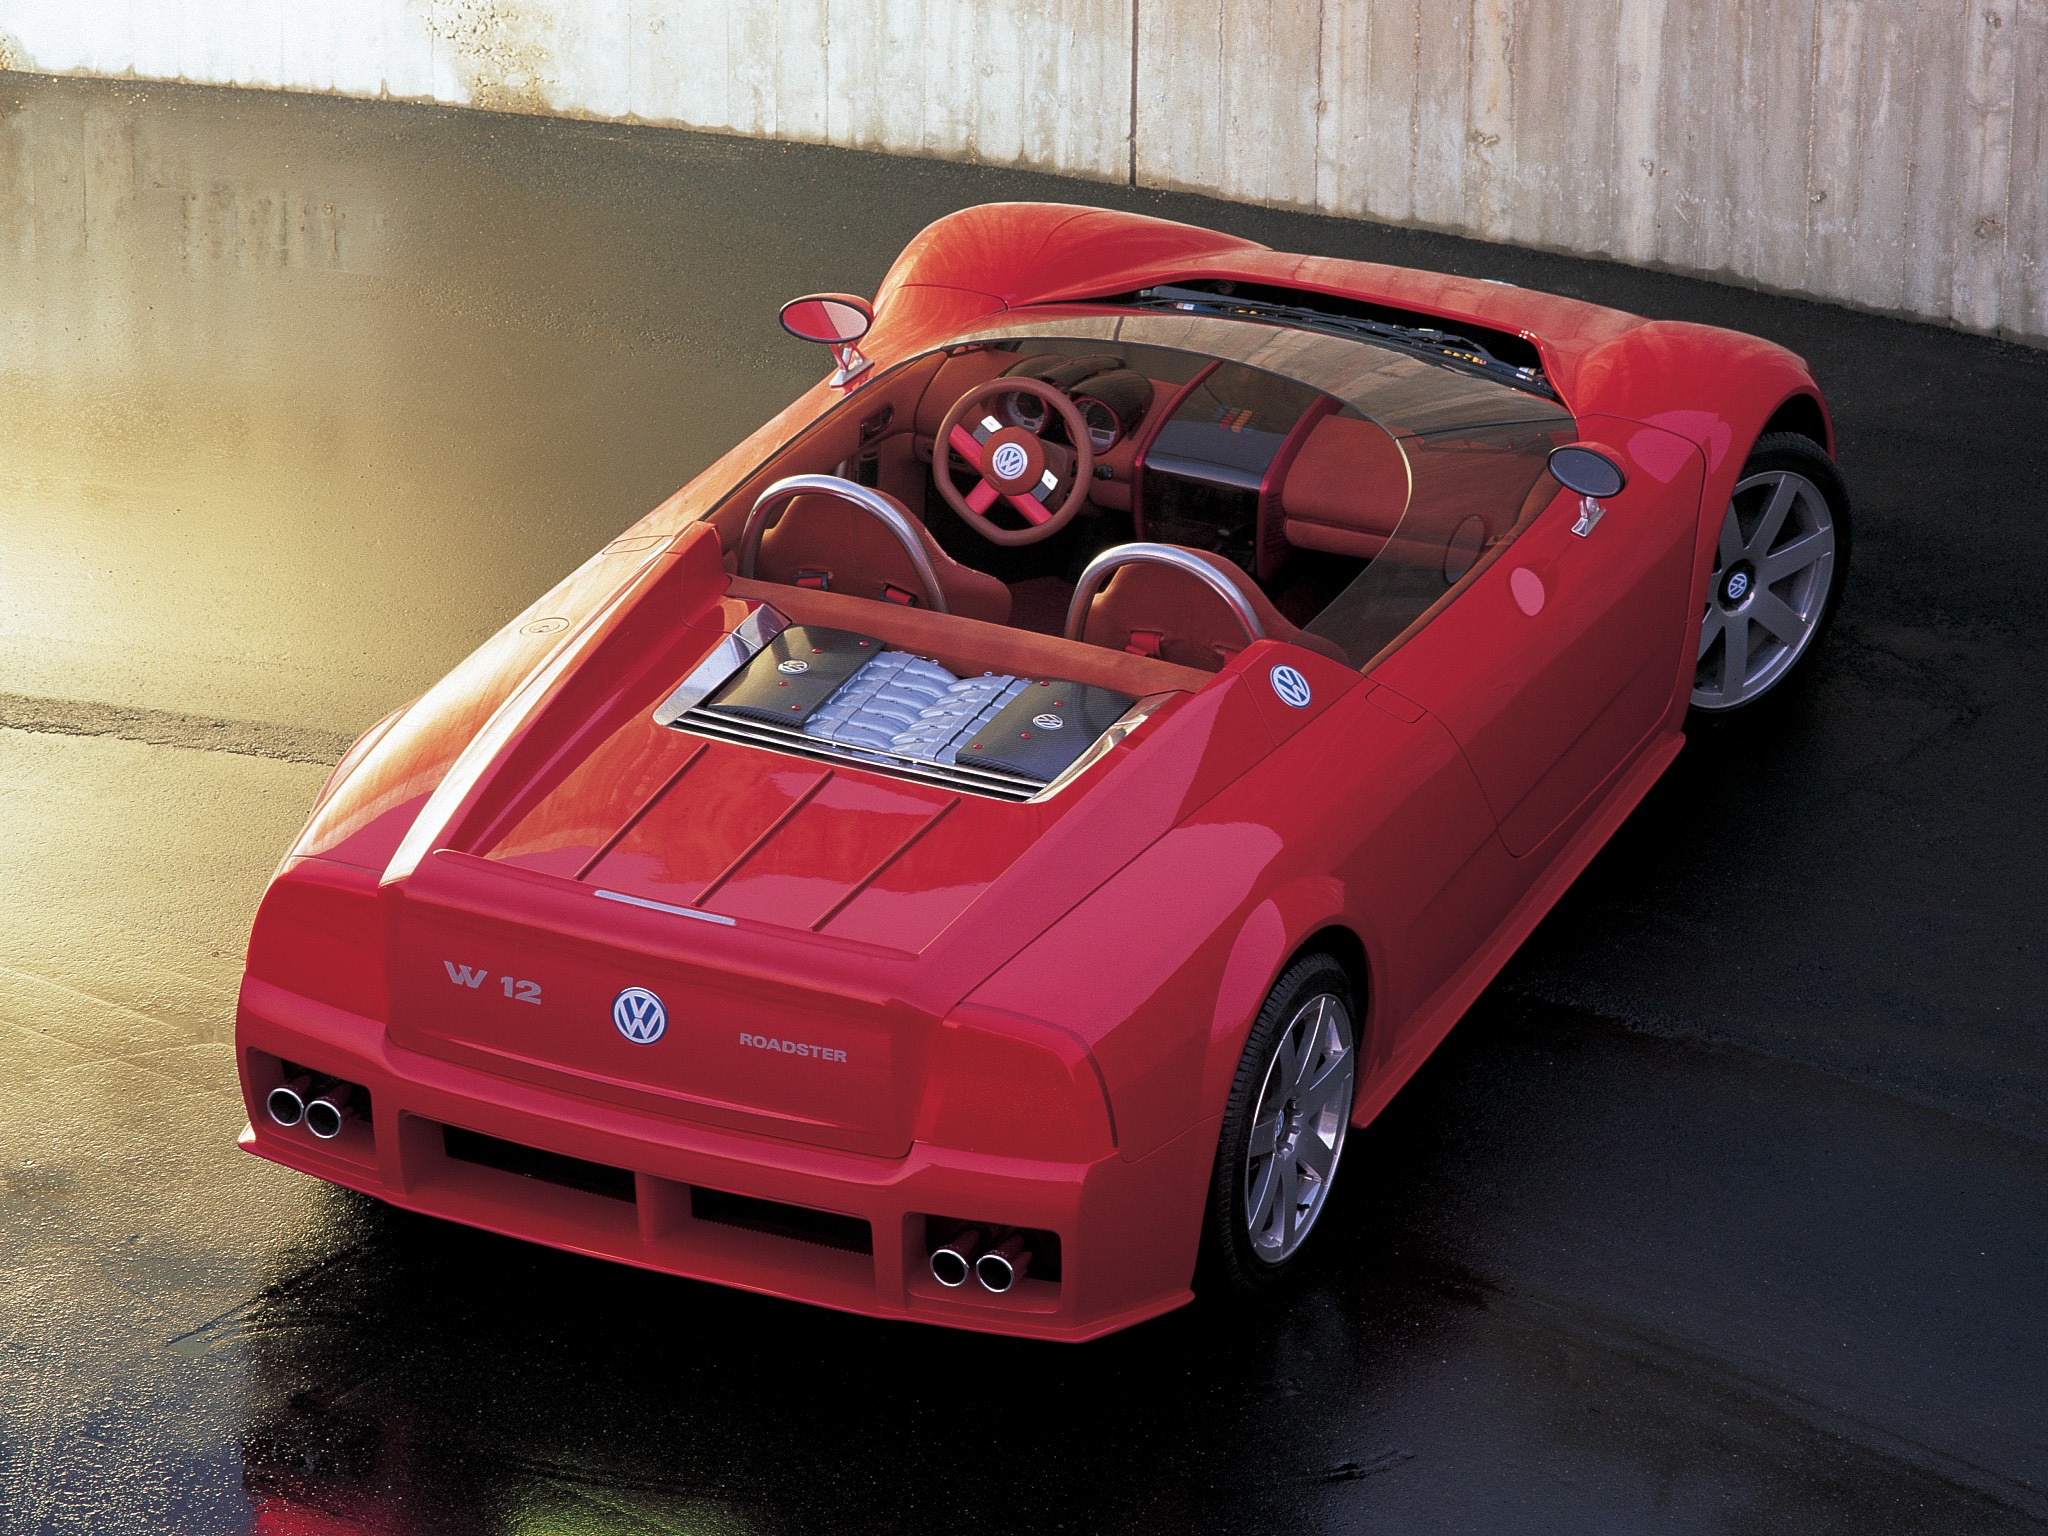 Volkswagen W12 Roadster Concept (1998) - Old Concept Cars